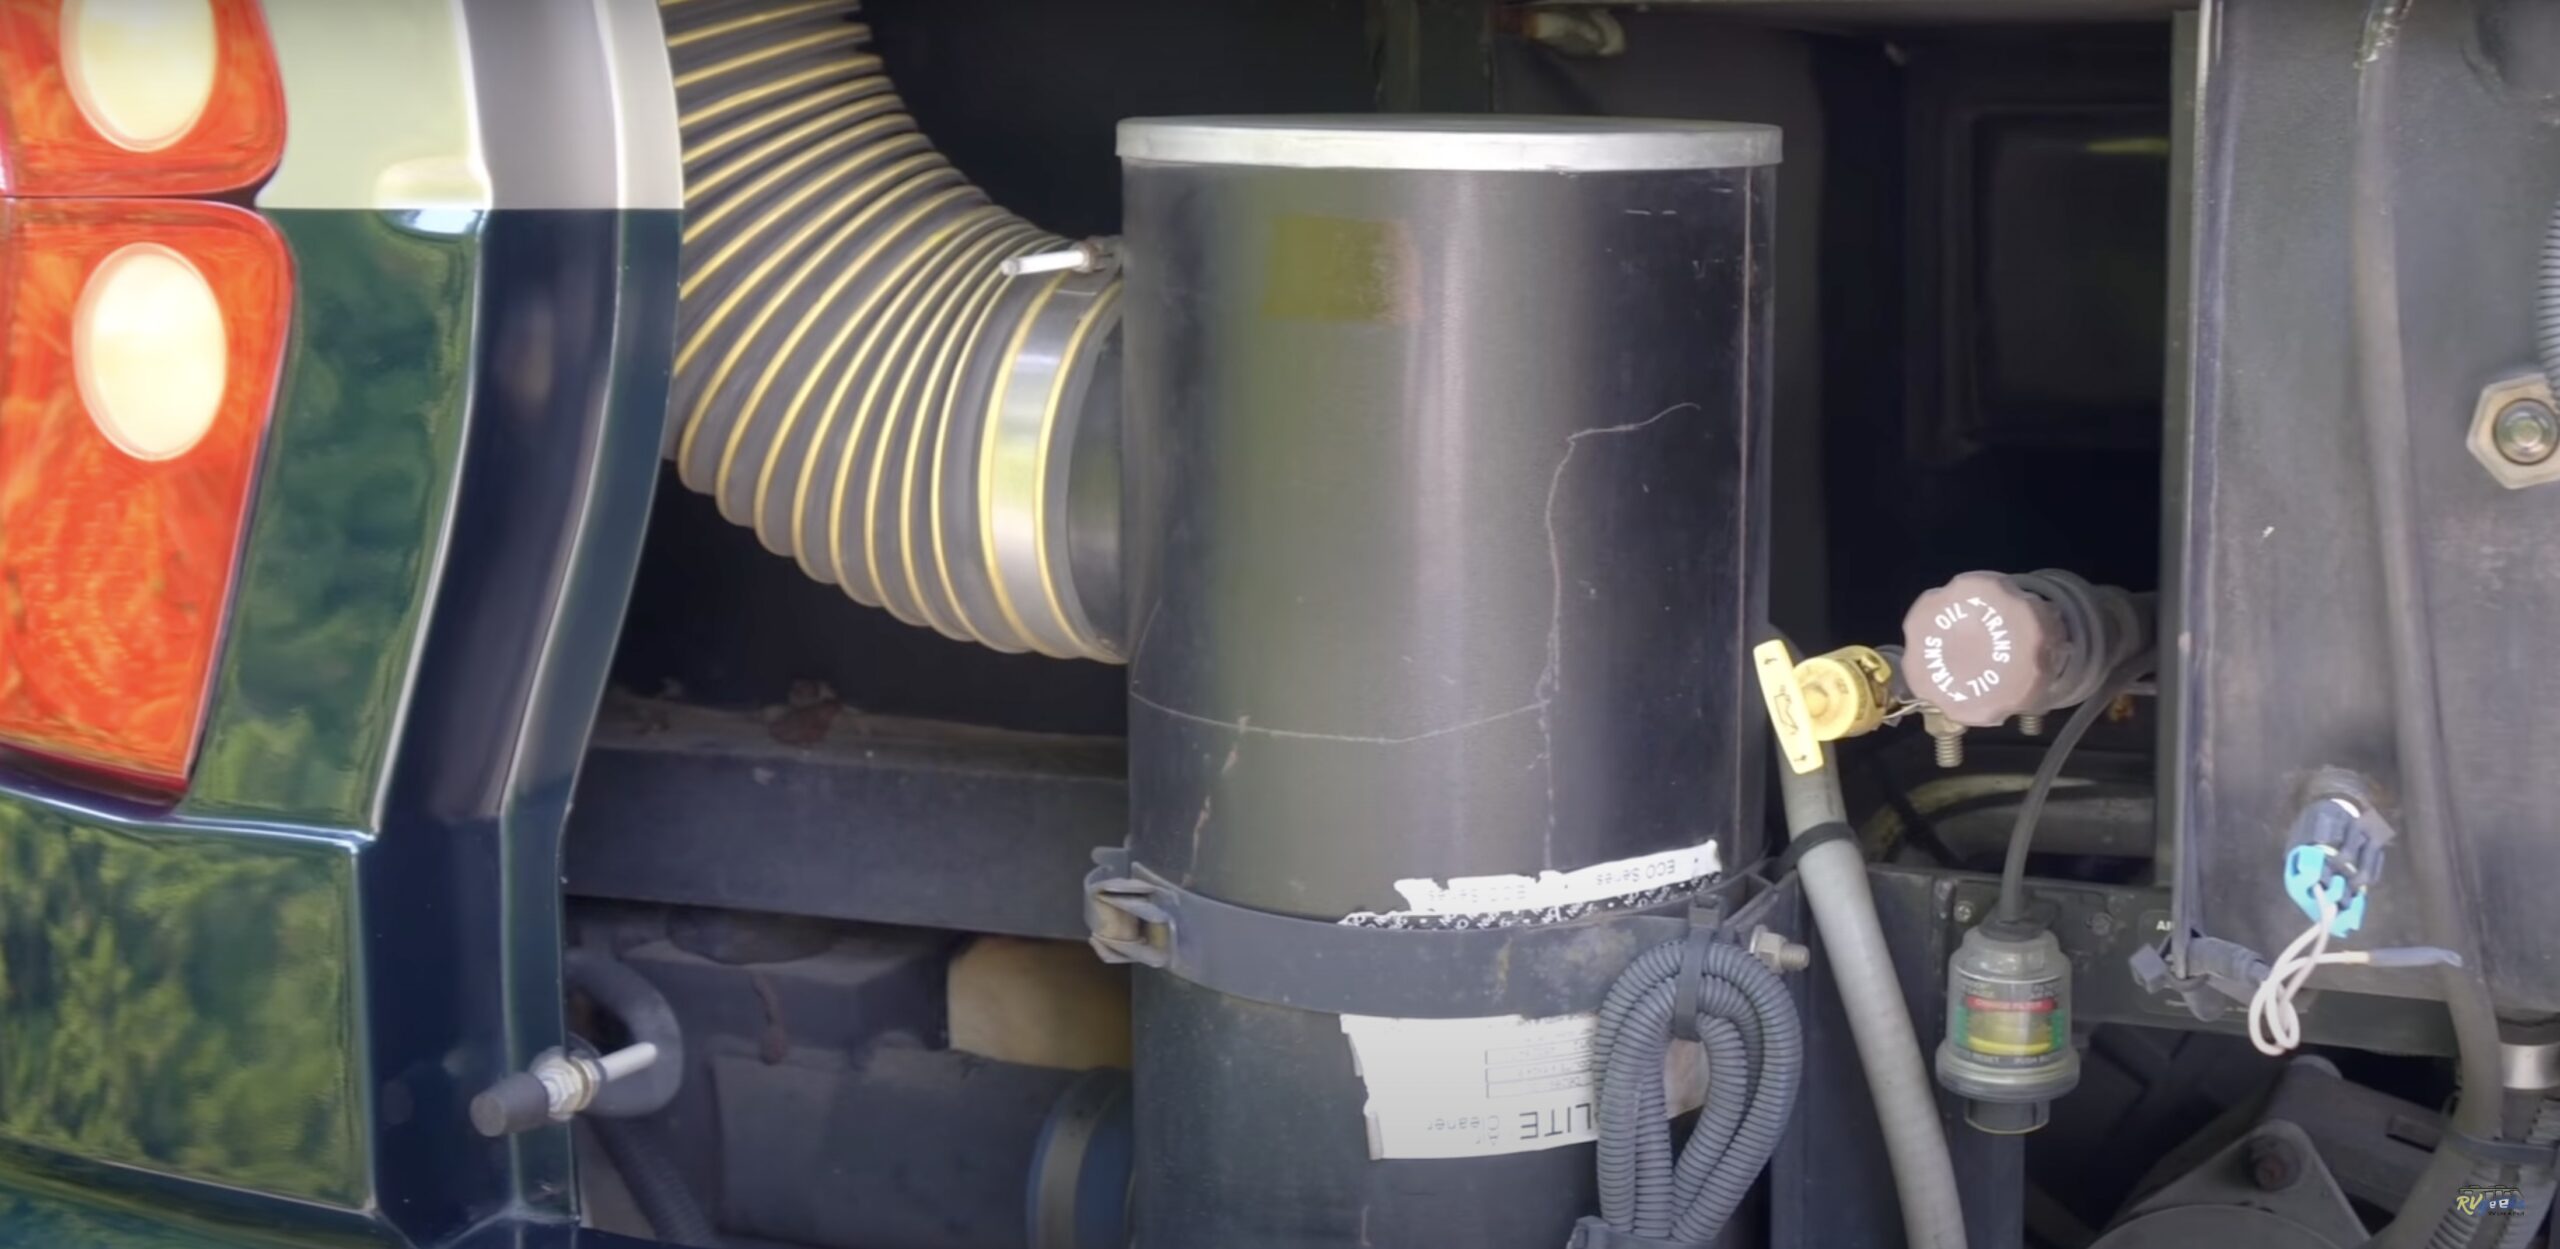 Changing our RV's air filter is an easy and important RV DIY fluid & filter replacement task